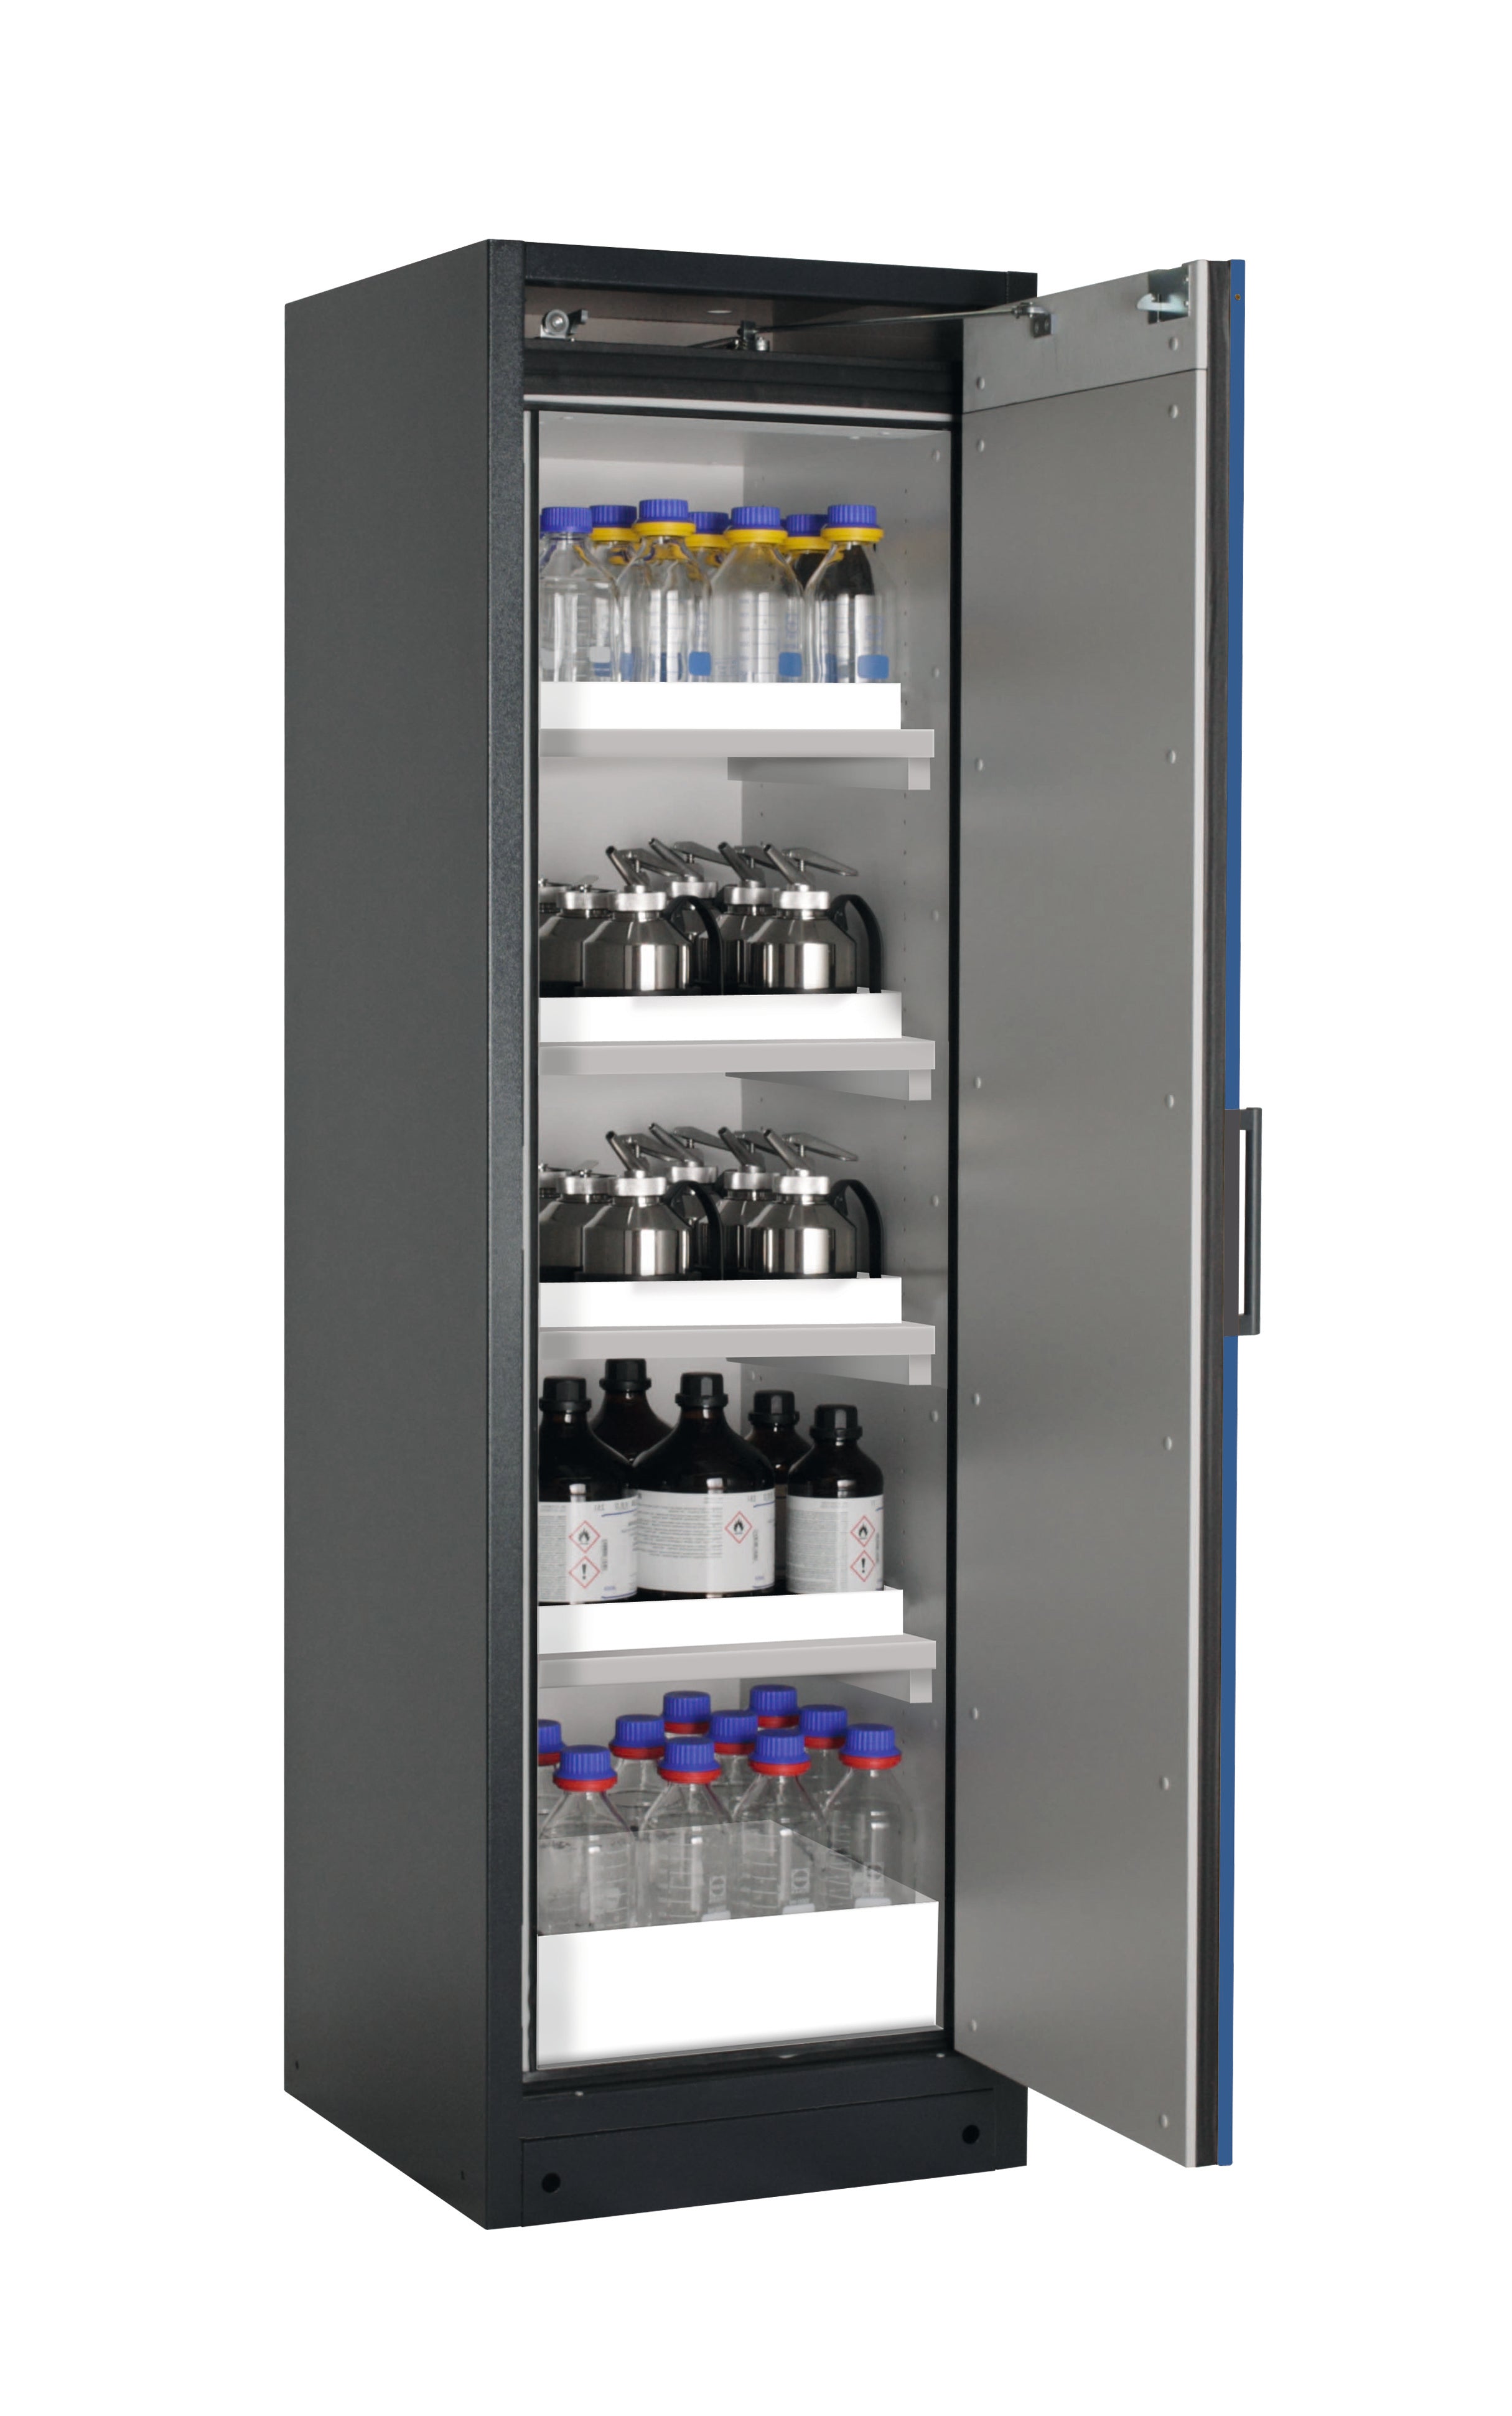 Type 90 safety storage cabinet Q-CLASSIC-90 model Q90.195.060.R in gentian blue RAL 5010 with 4x tray shelf (standard) (polypropylene),